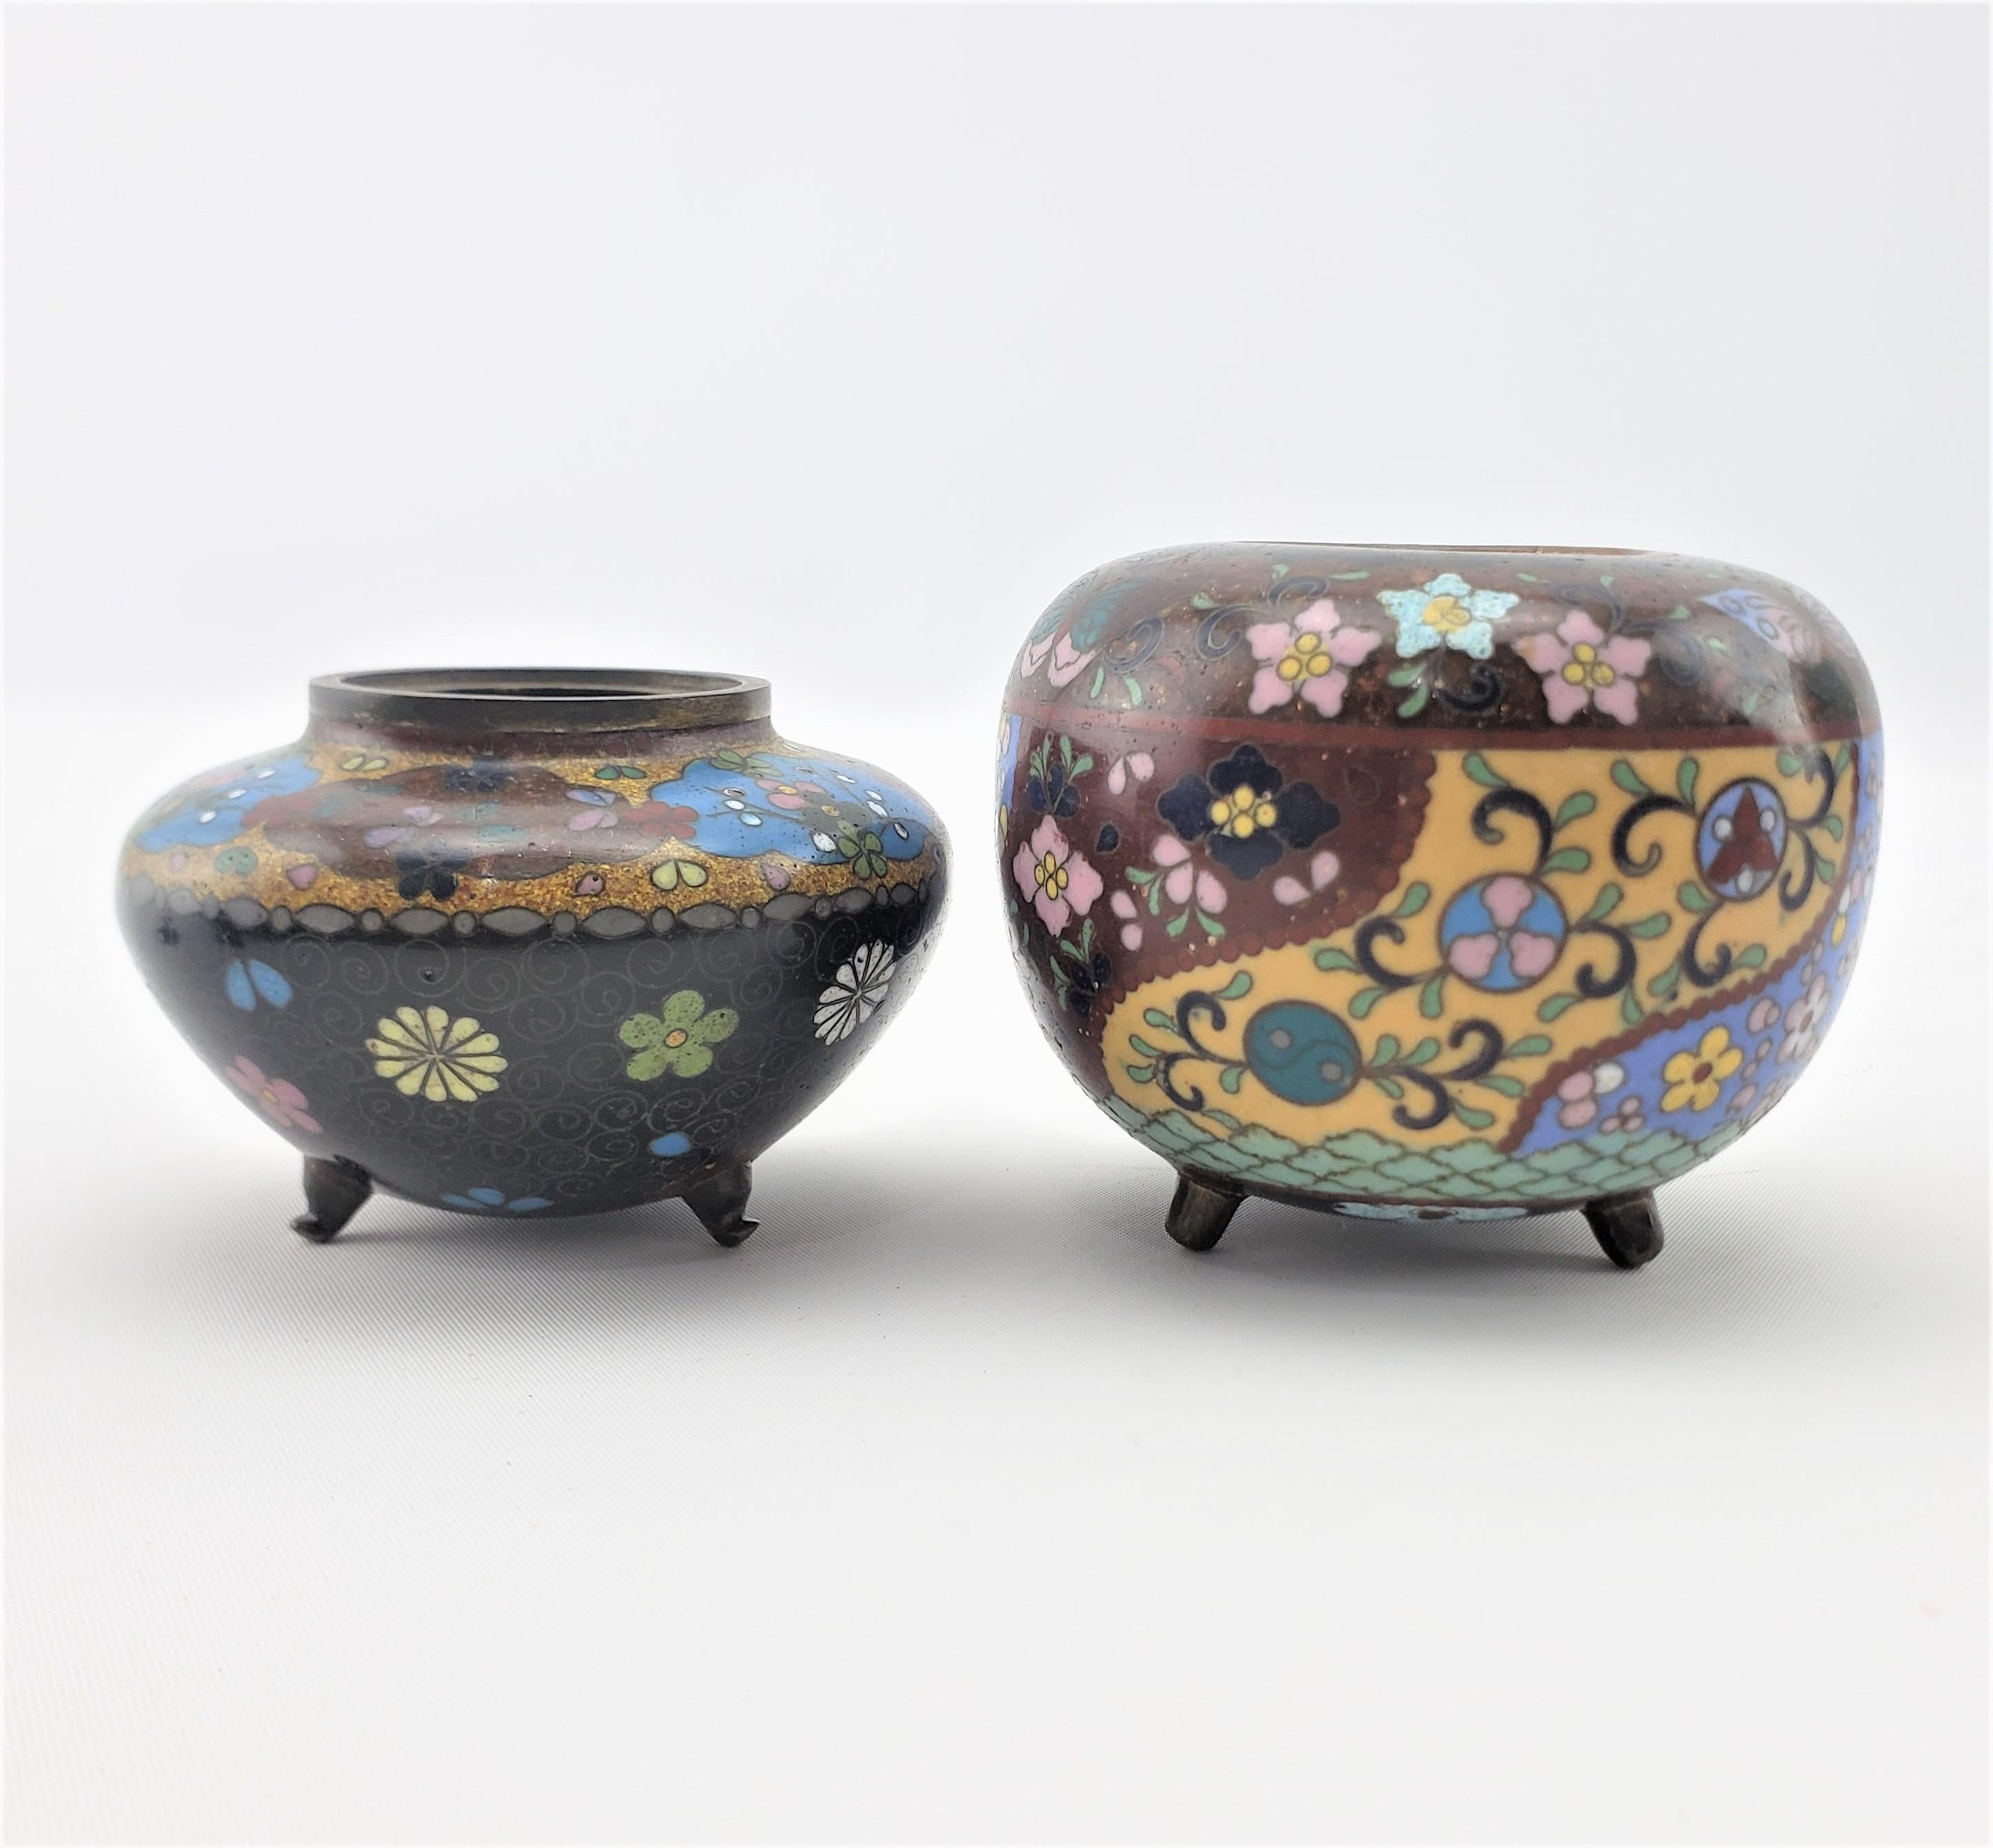 Pair of Antique Japanese Cloisonne Covered Jars with Floral Motif Decoration For Sale 4